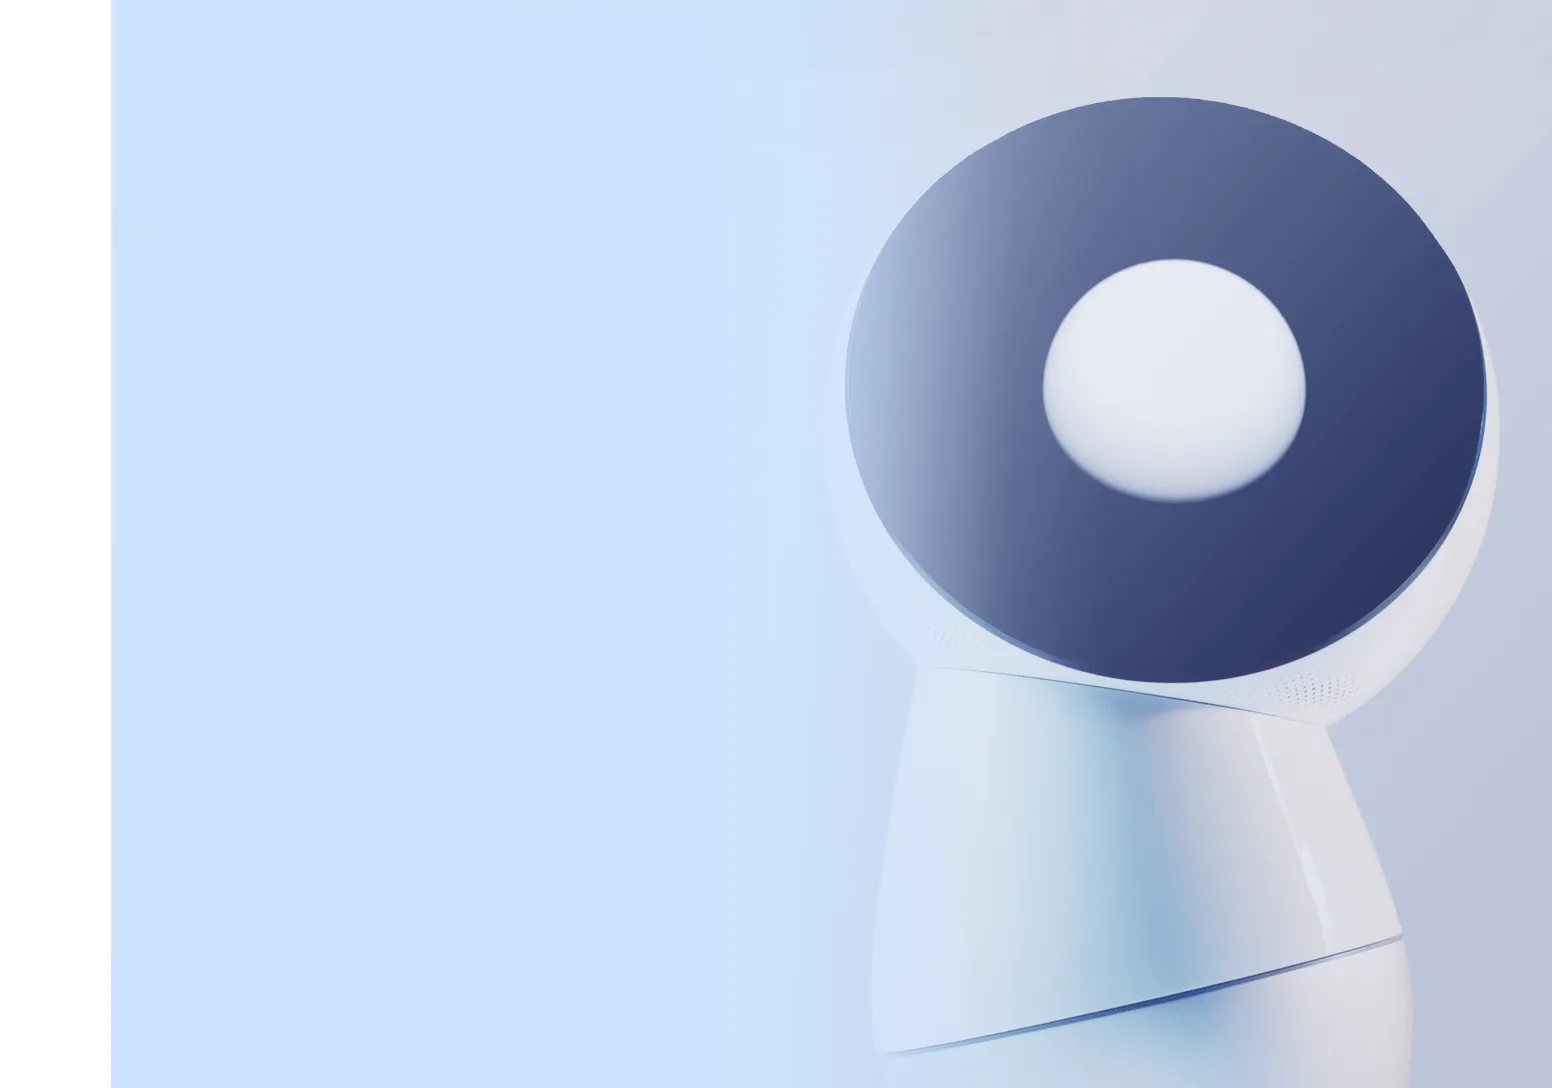 Jibo: Server-Side and Mobile Development for the First Social Robot background